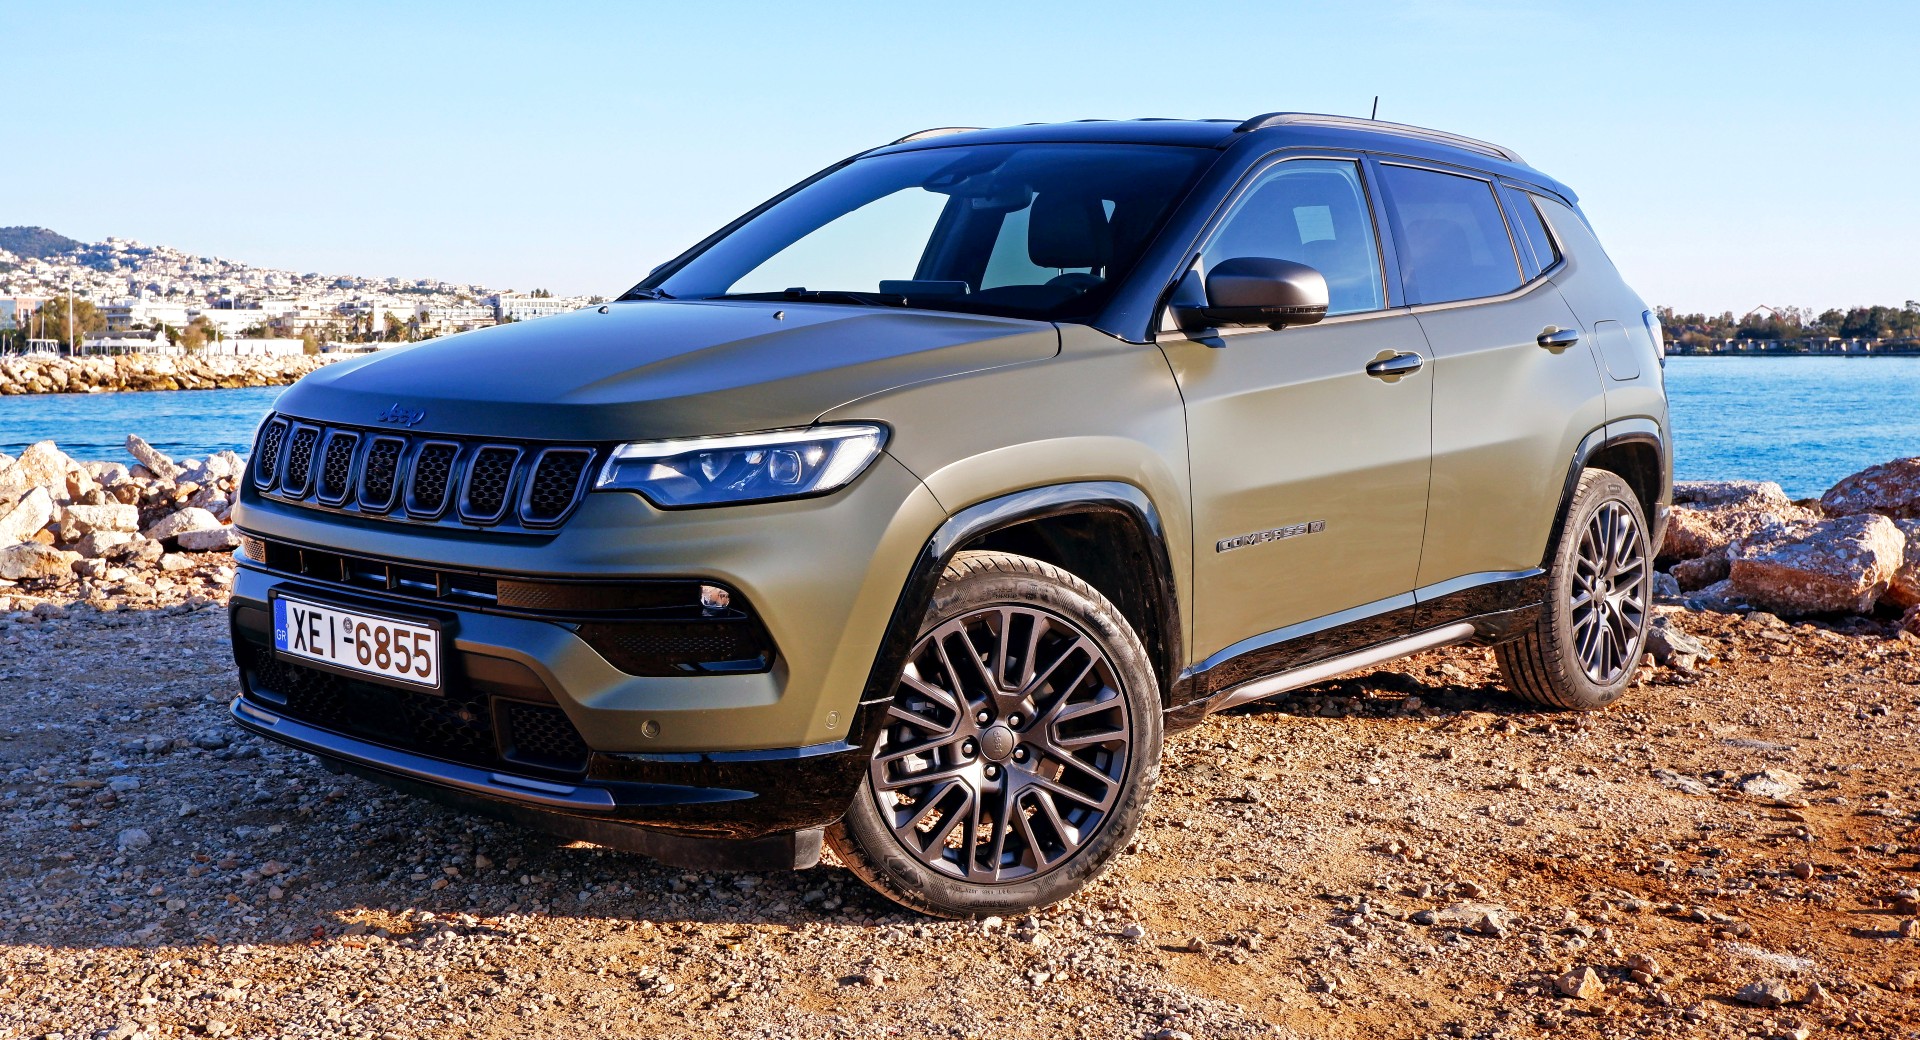 We’re Driving Jeep’s Plug-in Hybrid 2022 Compass 4Xe, What Do You Want To Know? Auto Recent